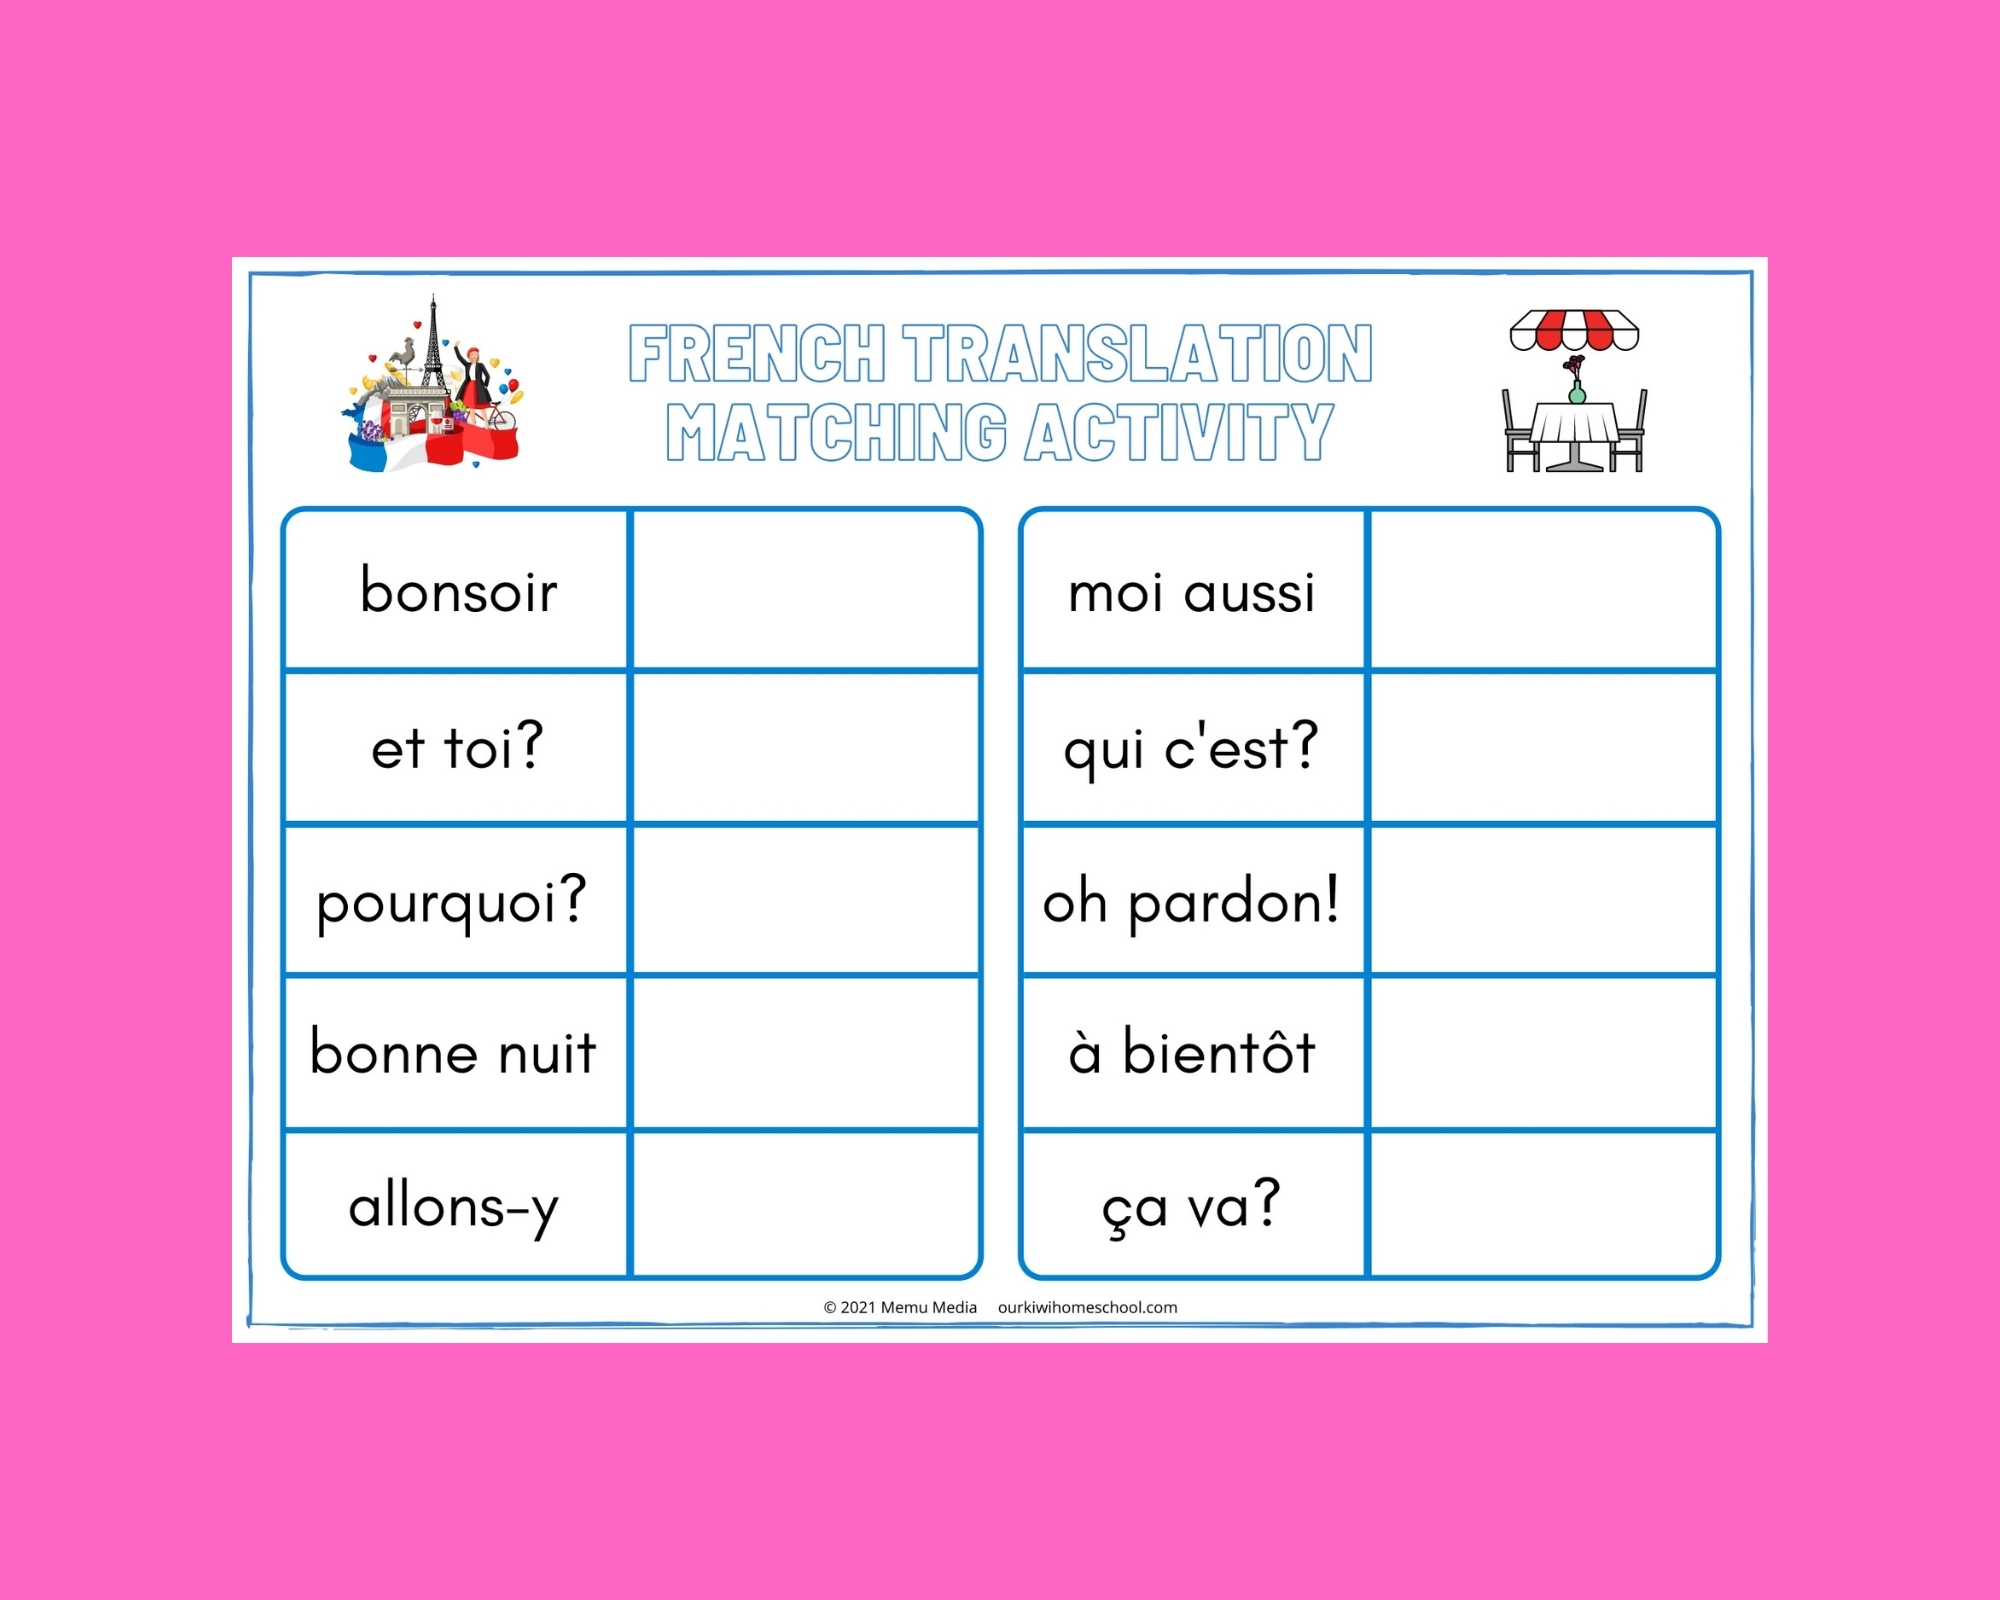 assignment translation to french